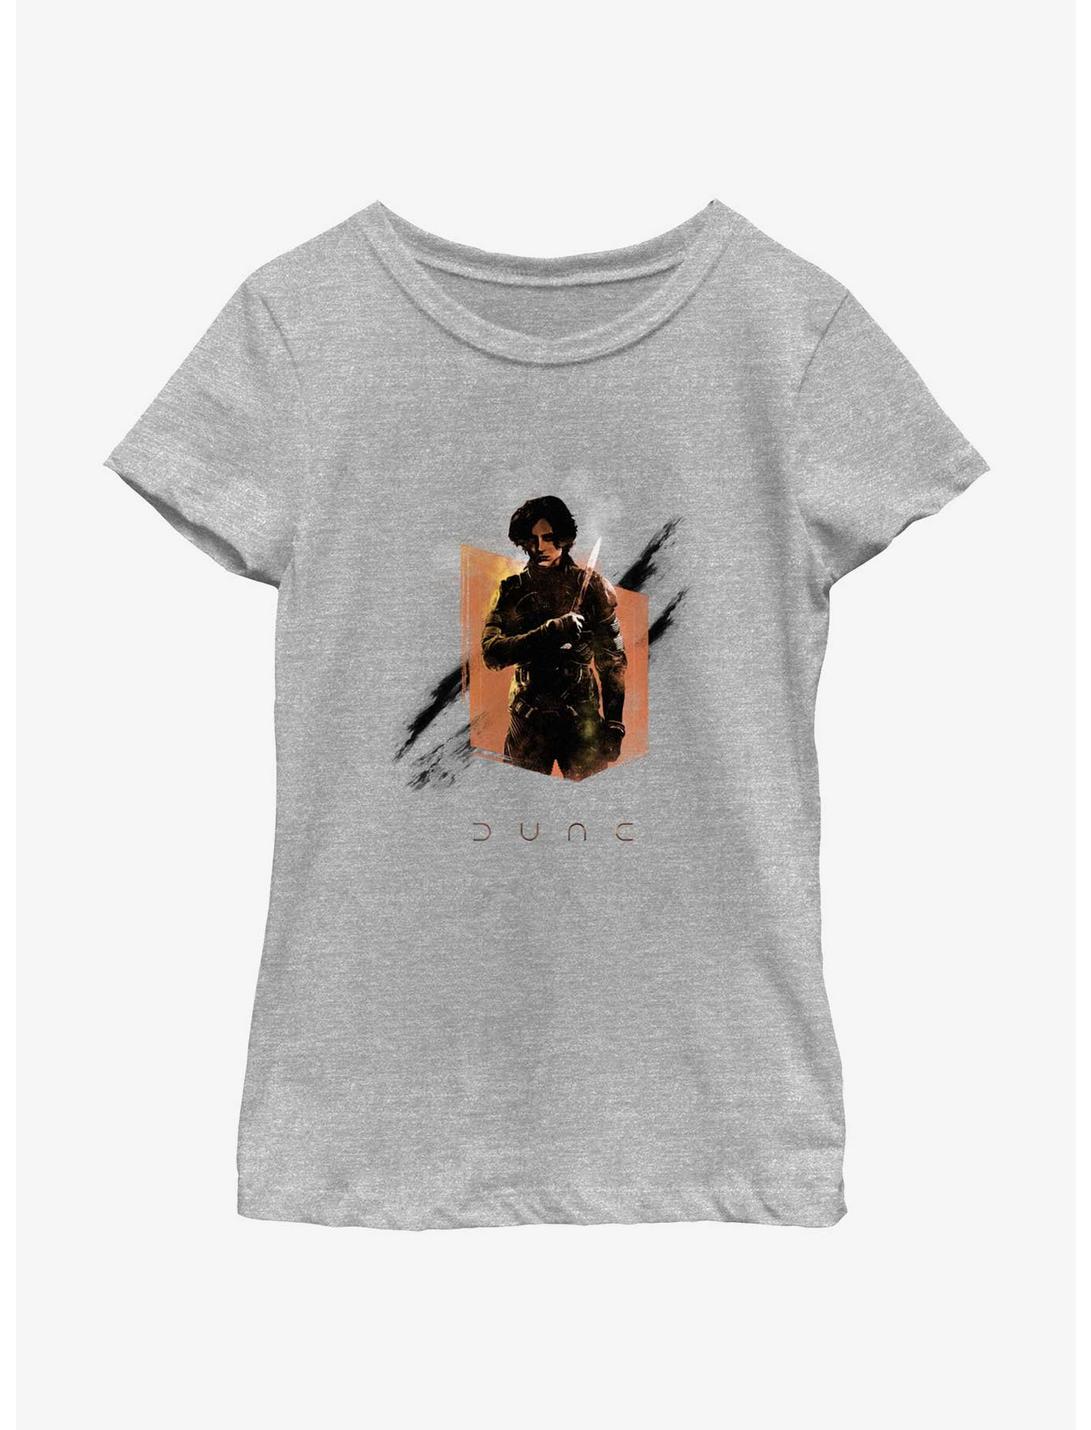 Dune: Part Two Paul Sandstorm Youth Girls T-Shirt, ATH HTR, hi-res